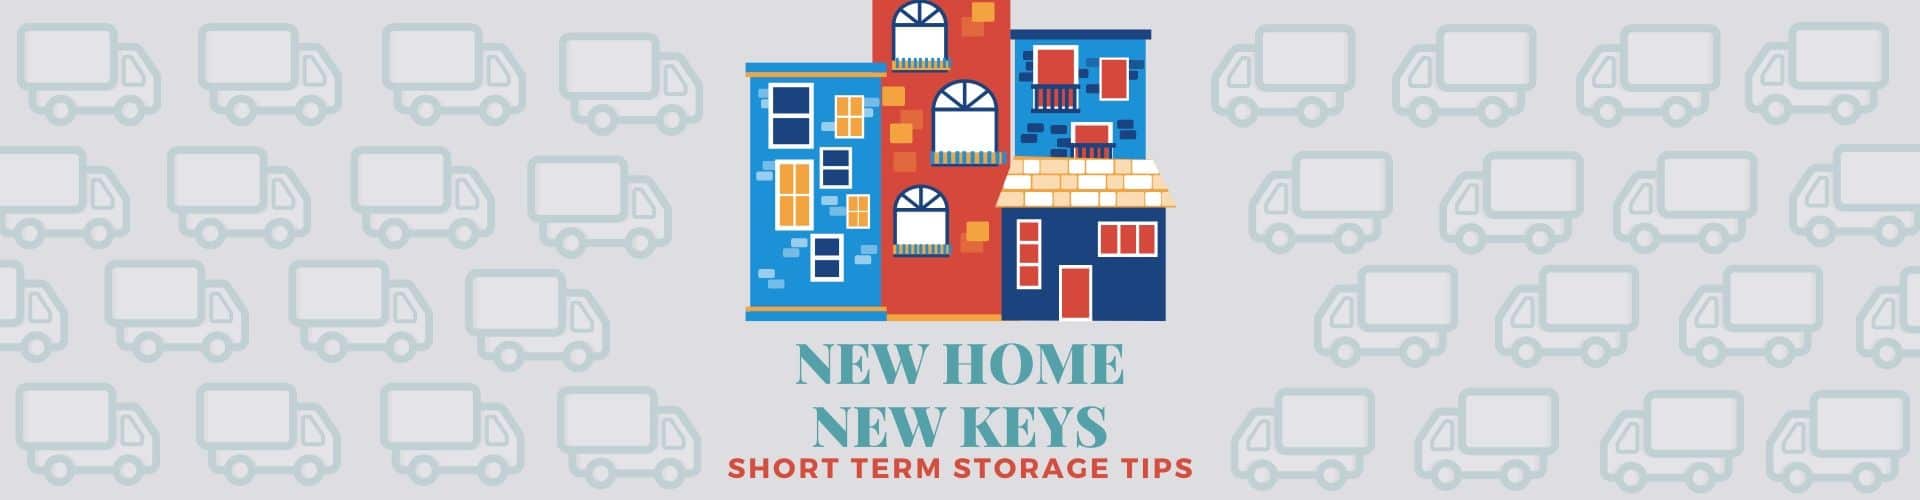 Organize Your Home or Business With Short Term Storage